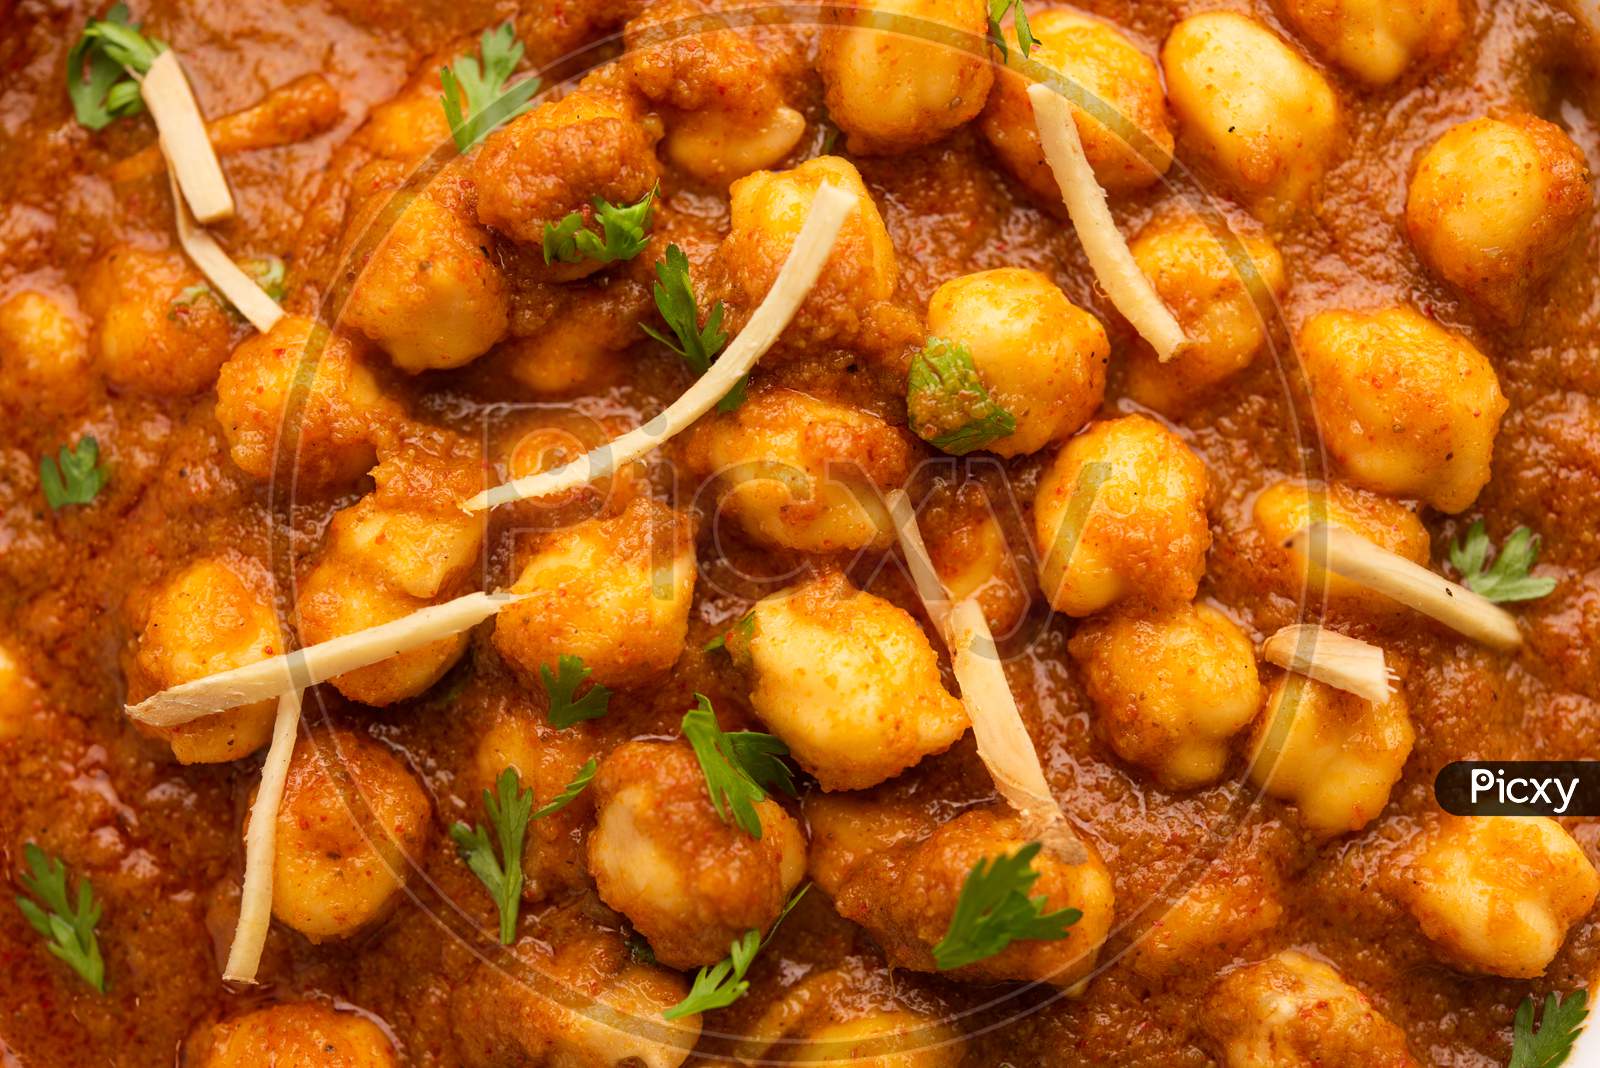 Choley, Chole Masala Or Chana An Indian Food Made Of Chickpeas, Tomatoes And Cumin Served With Laccha Paratha Or Roti And Rice